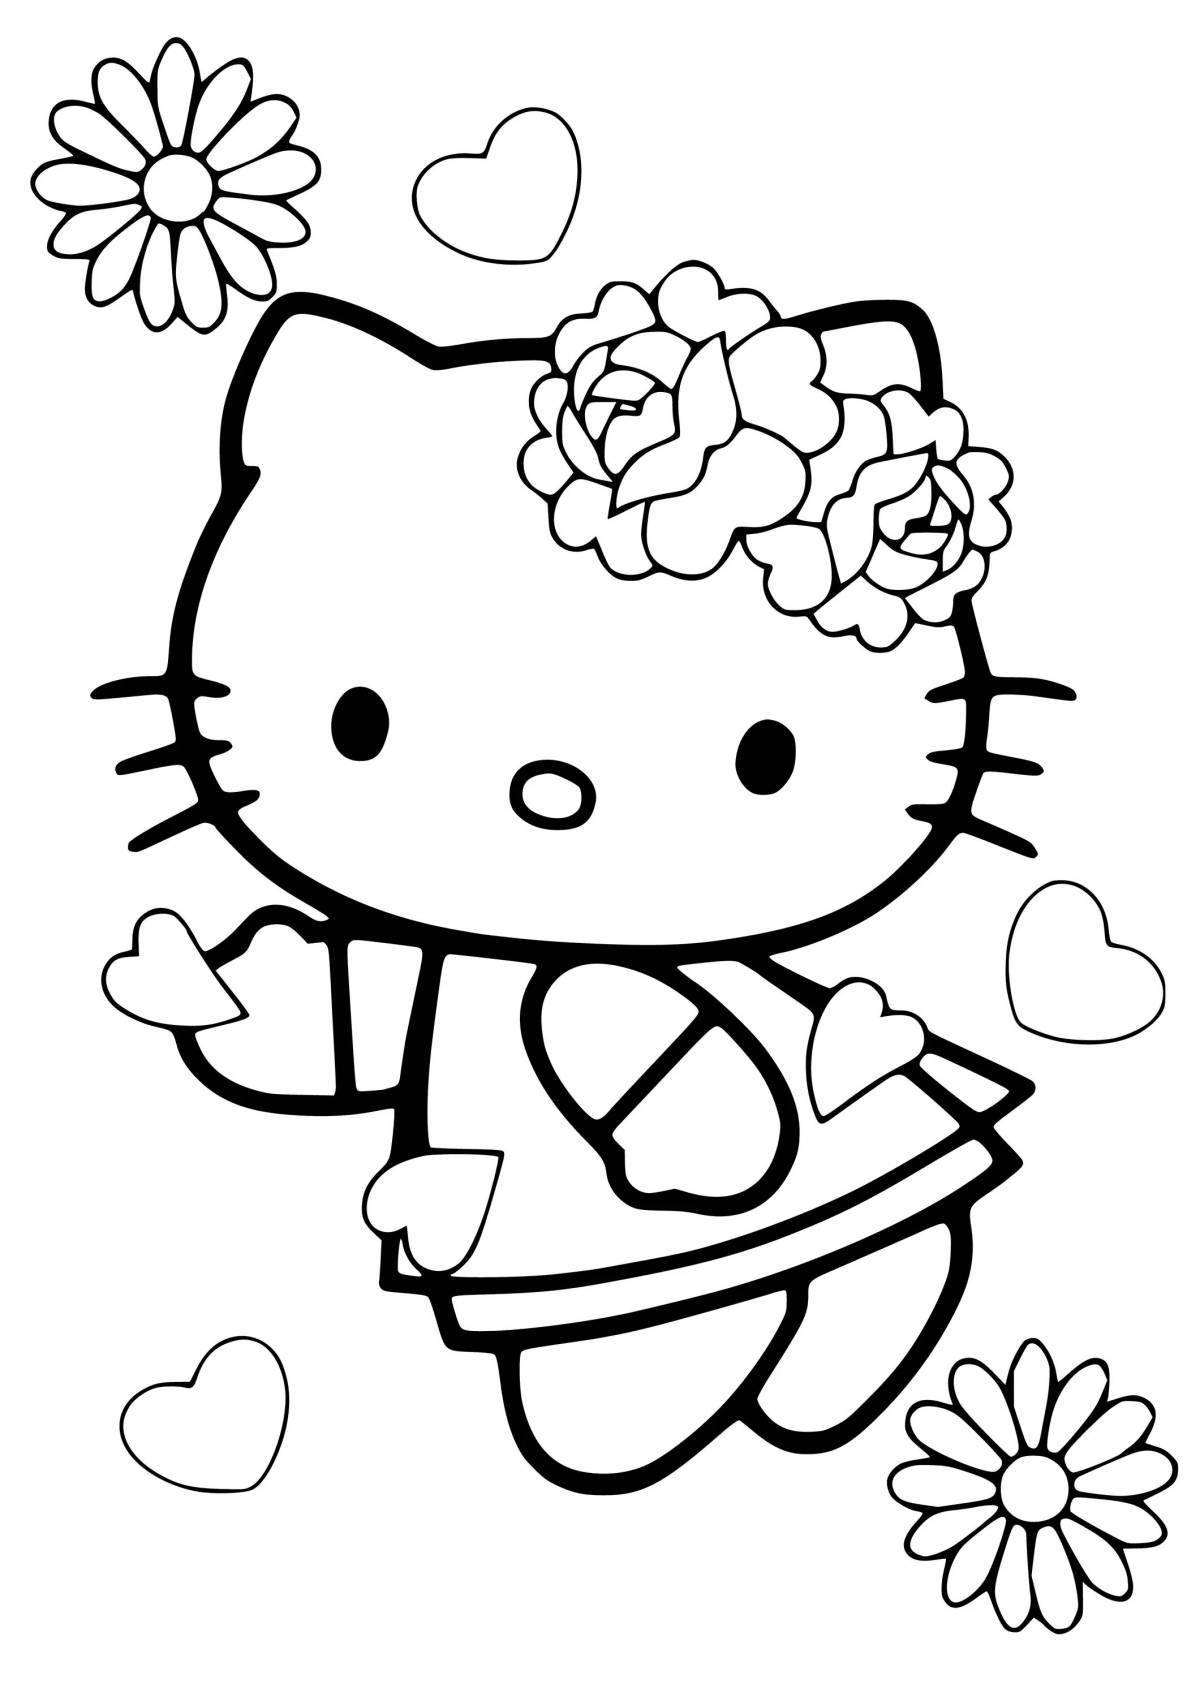 Coloring live hello kitty characters